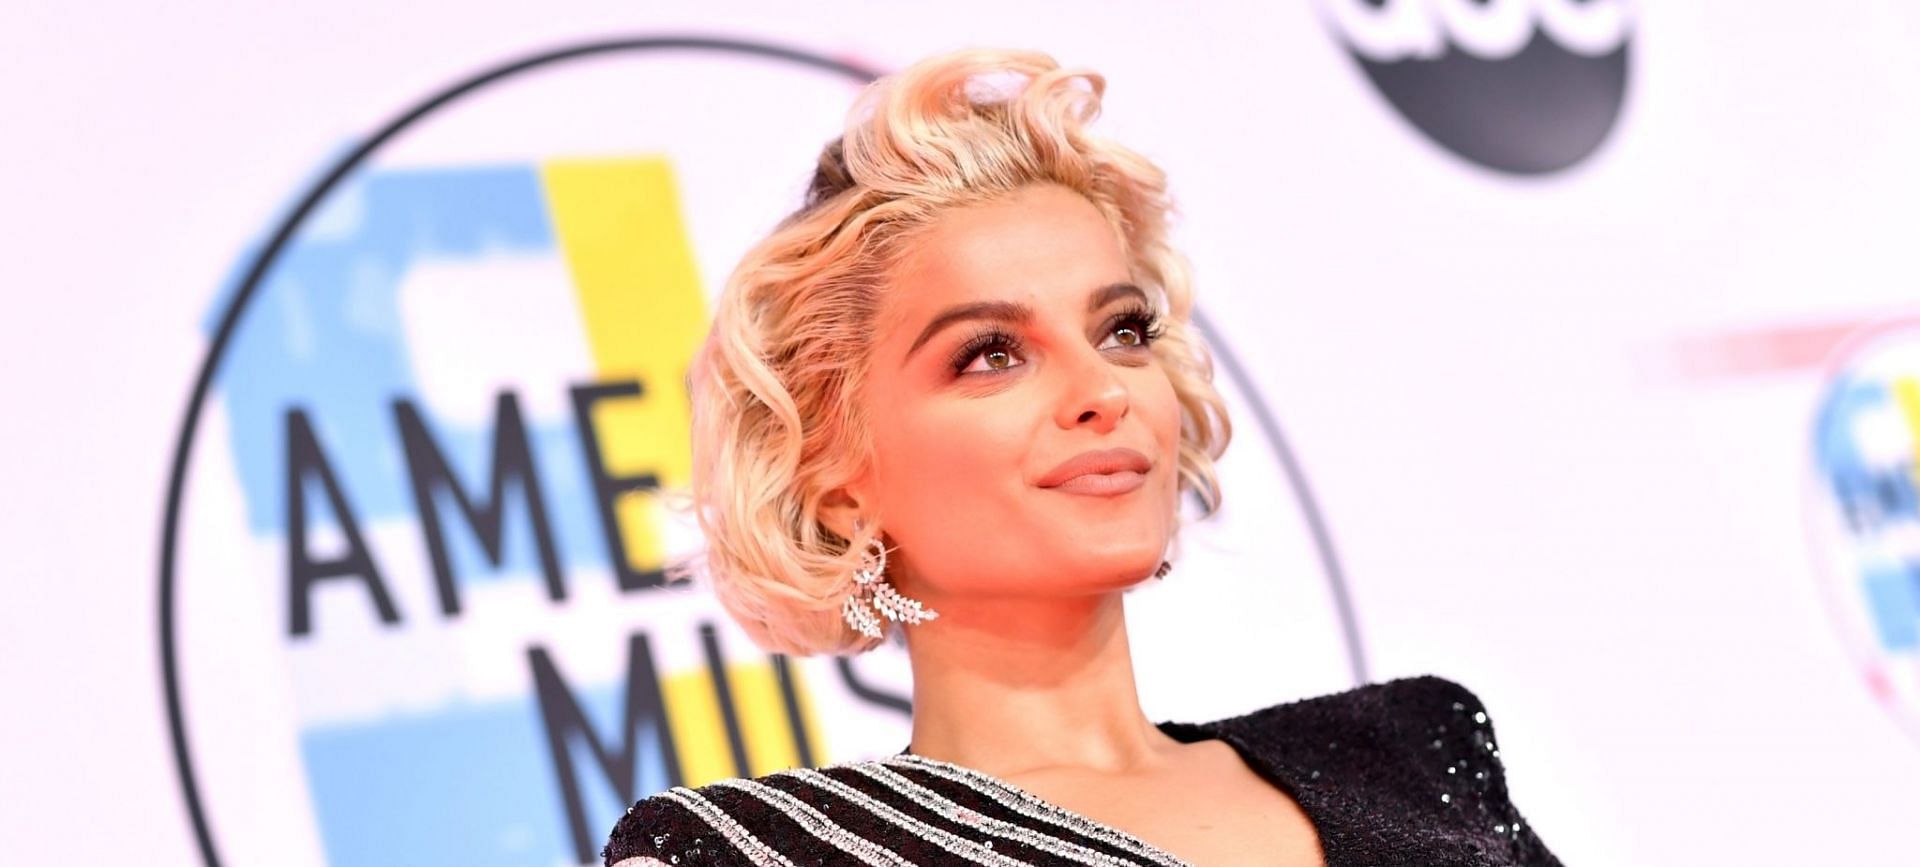 Bebe Rexha recently opened up about weight gain struggles (Image via Emma McIntyre/Getty Images)